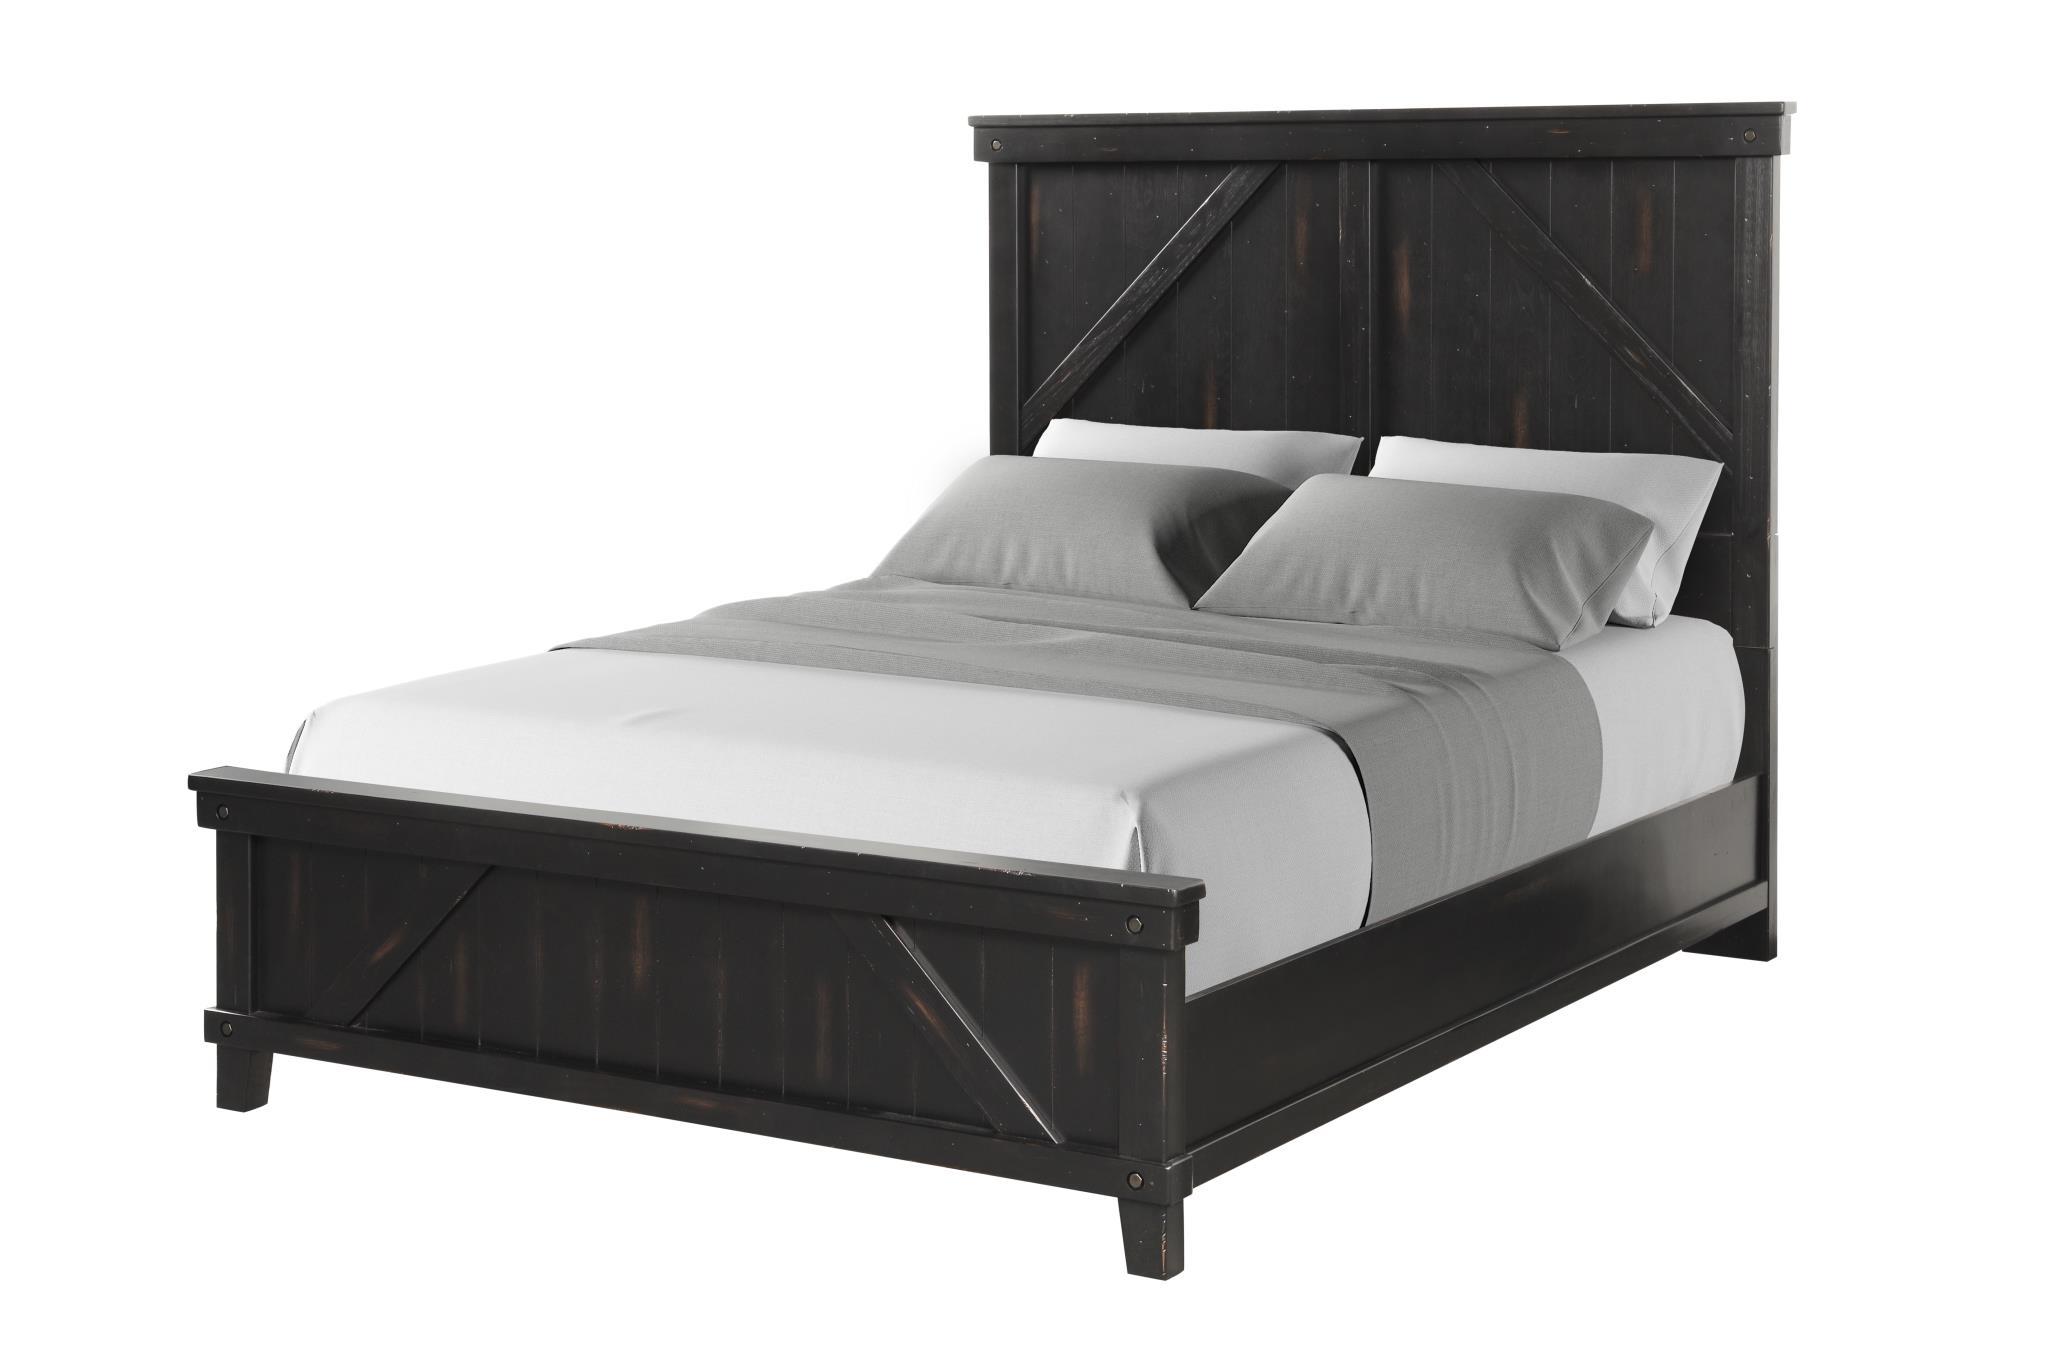 Classic, Transitional Panel Bed SPRUCE CREEK 1708-105 1708-105 in Black 